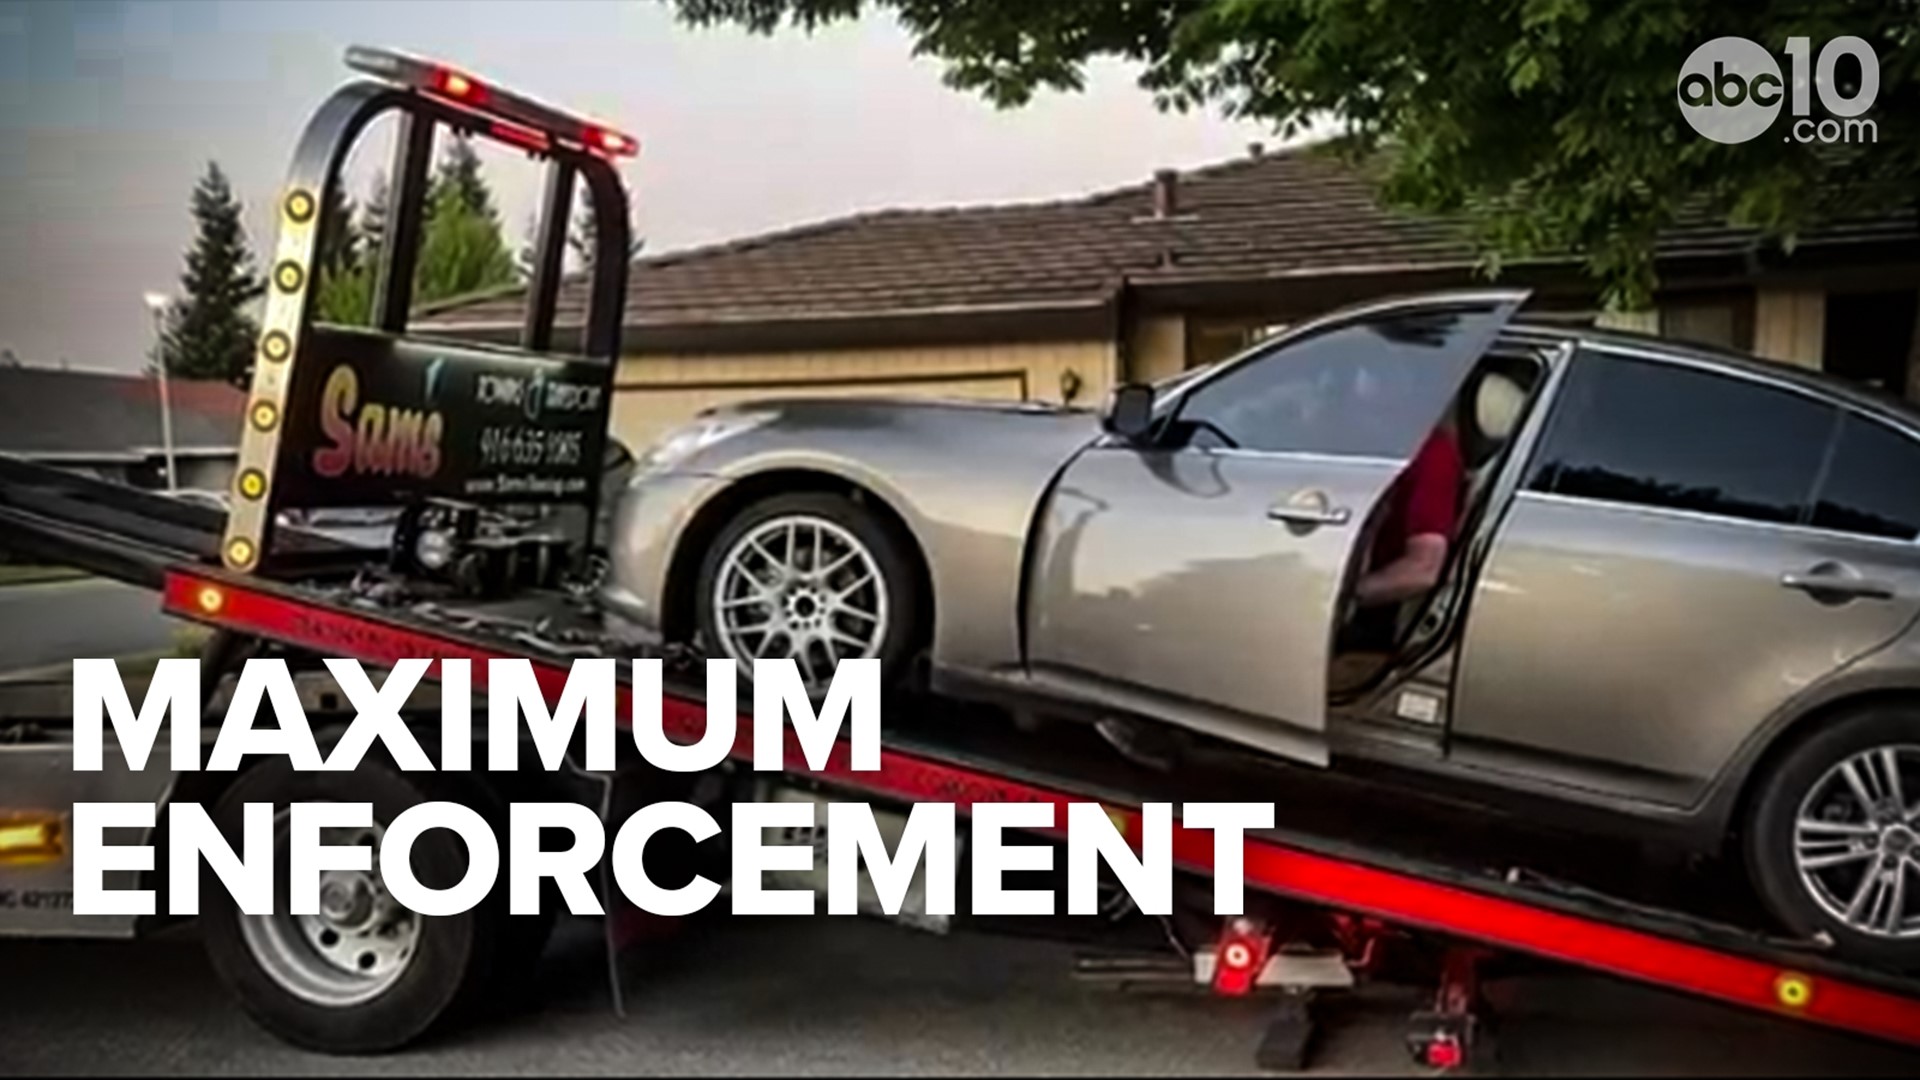 Sacramento police dedicated many officers to arrest sideshow participants and tow their cars this weekend, and residents want them to keep it up.